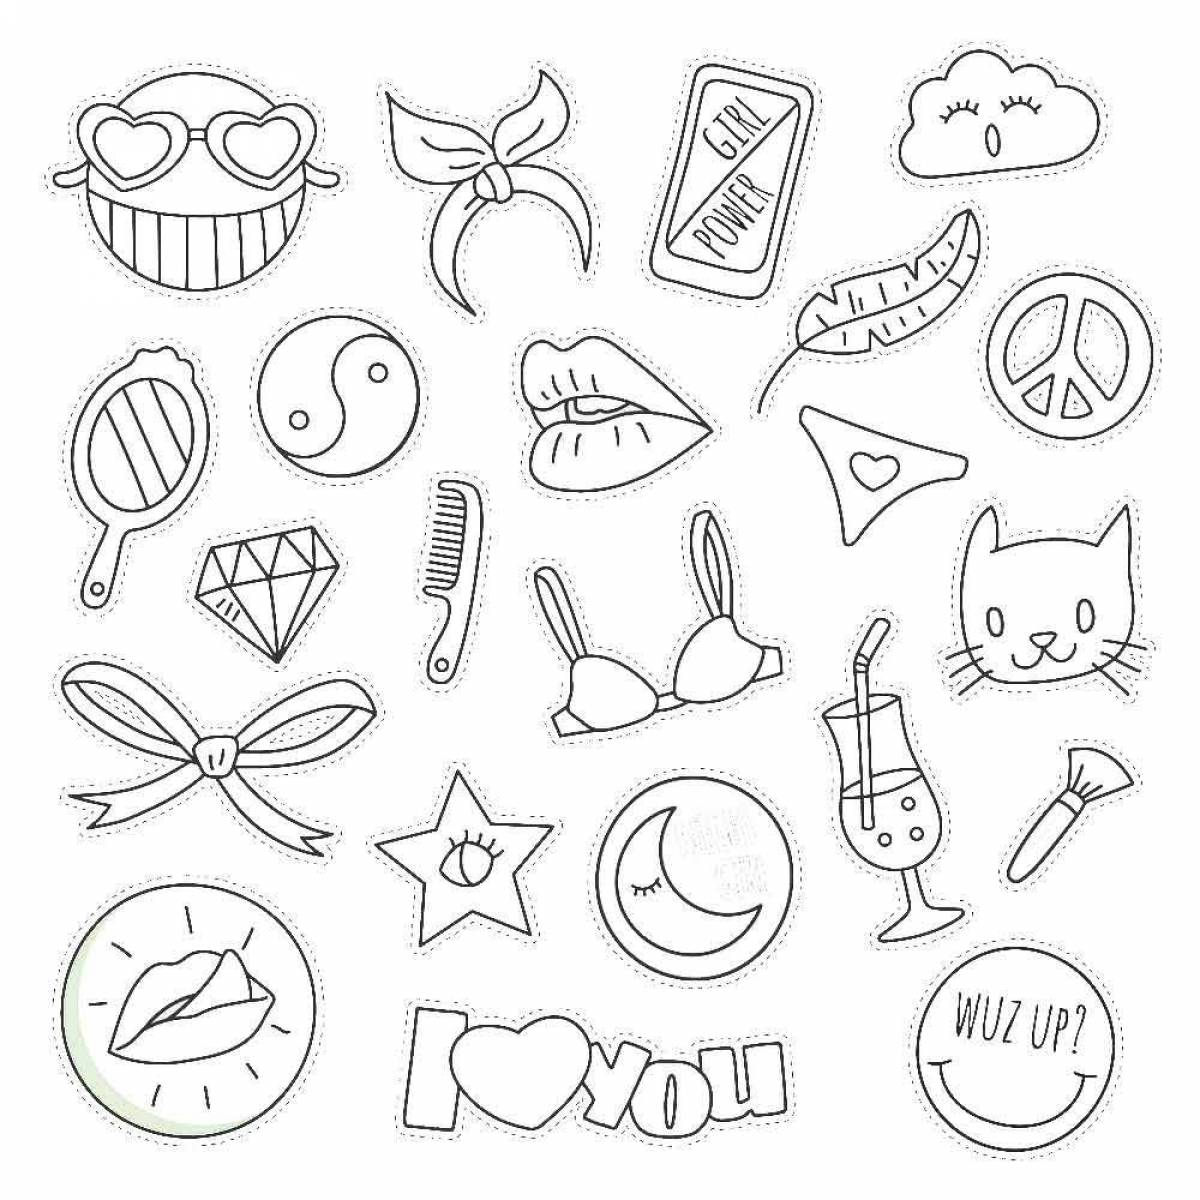 Amazing stickers for coloring pages